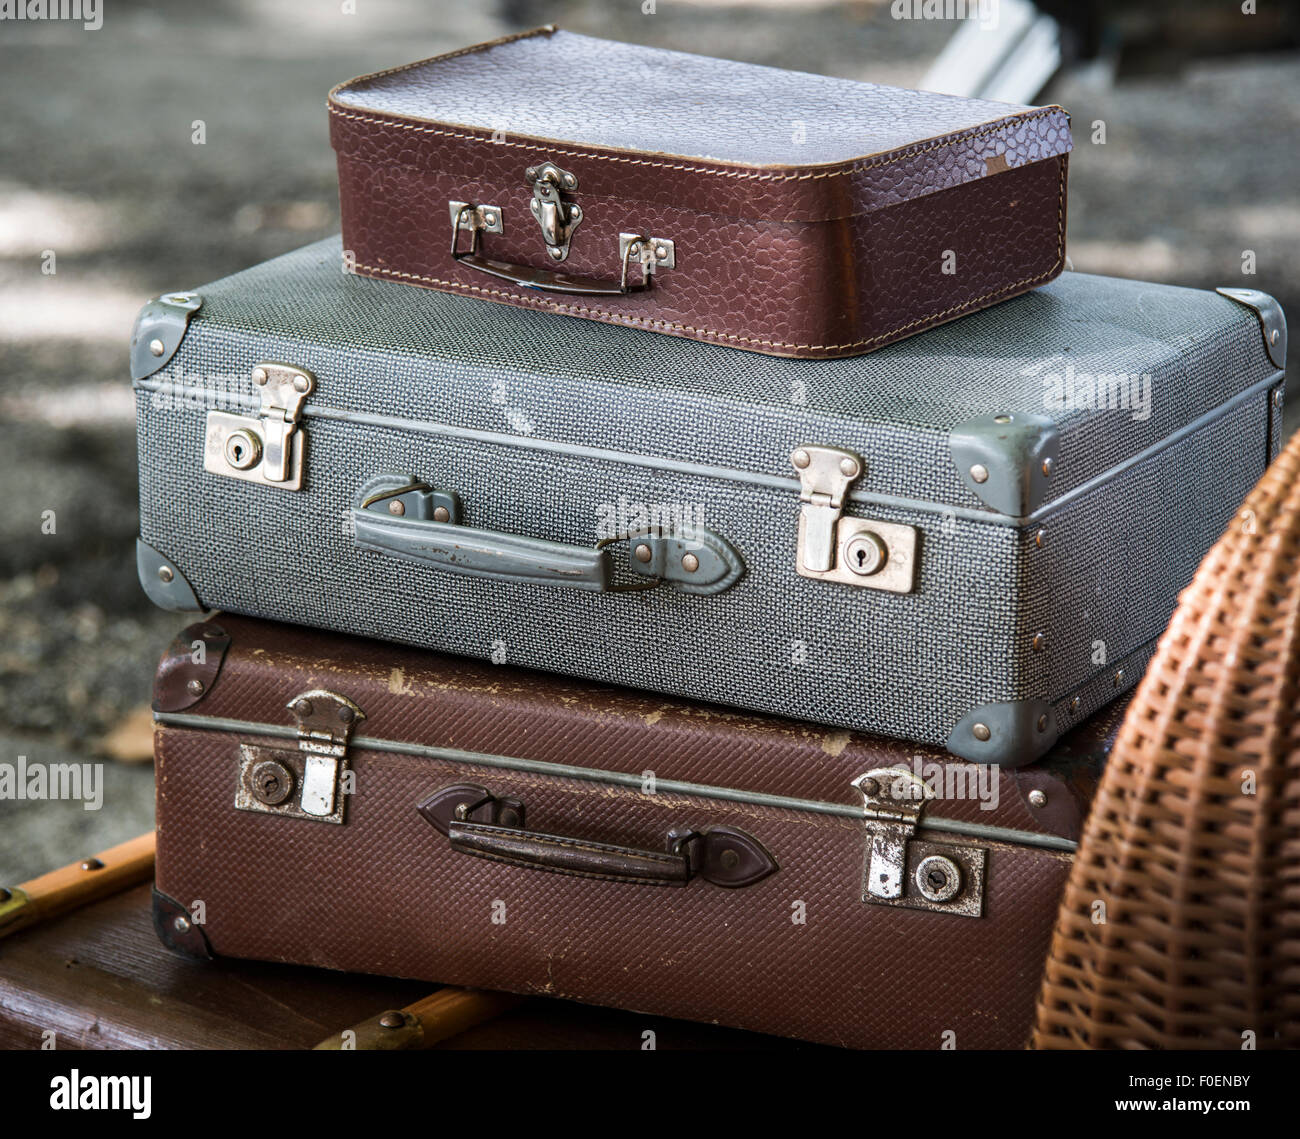 Vintage Old Classic Travel Leather Suitcases Circa 1940s Travel Luggage  Concept Retro Instagram Style Filtered Photo Stock Photo - Download Image  Now - iStock